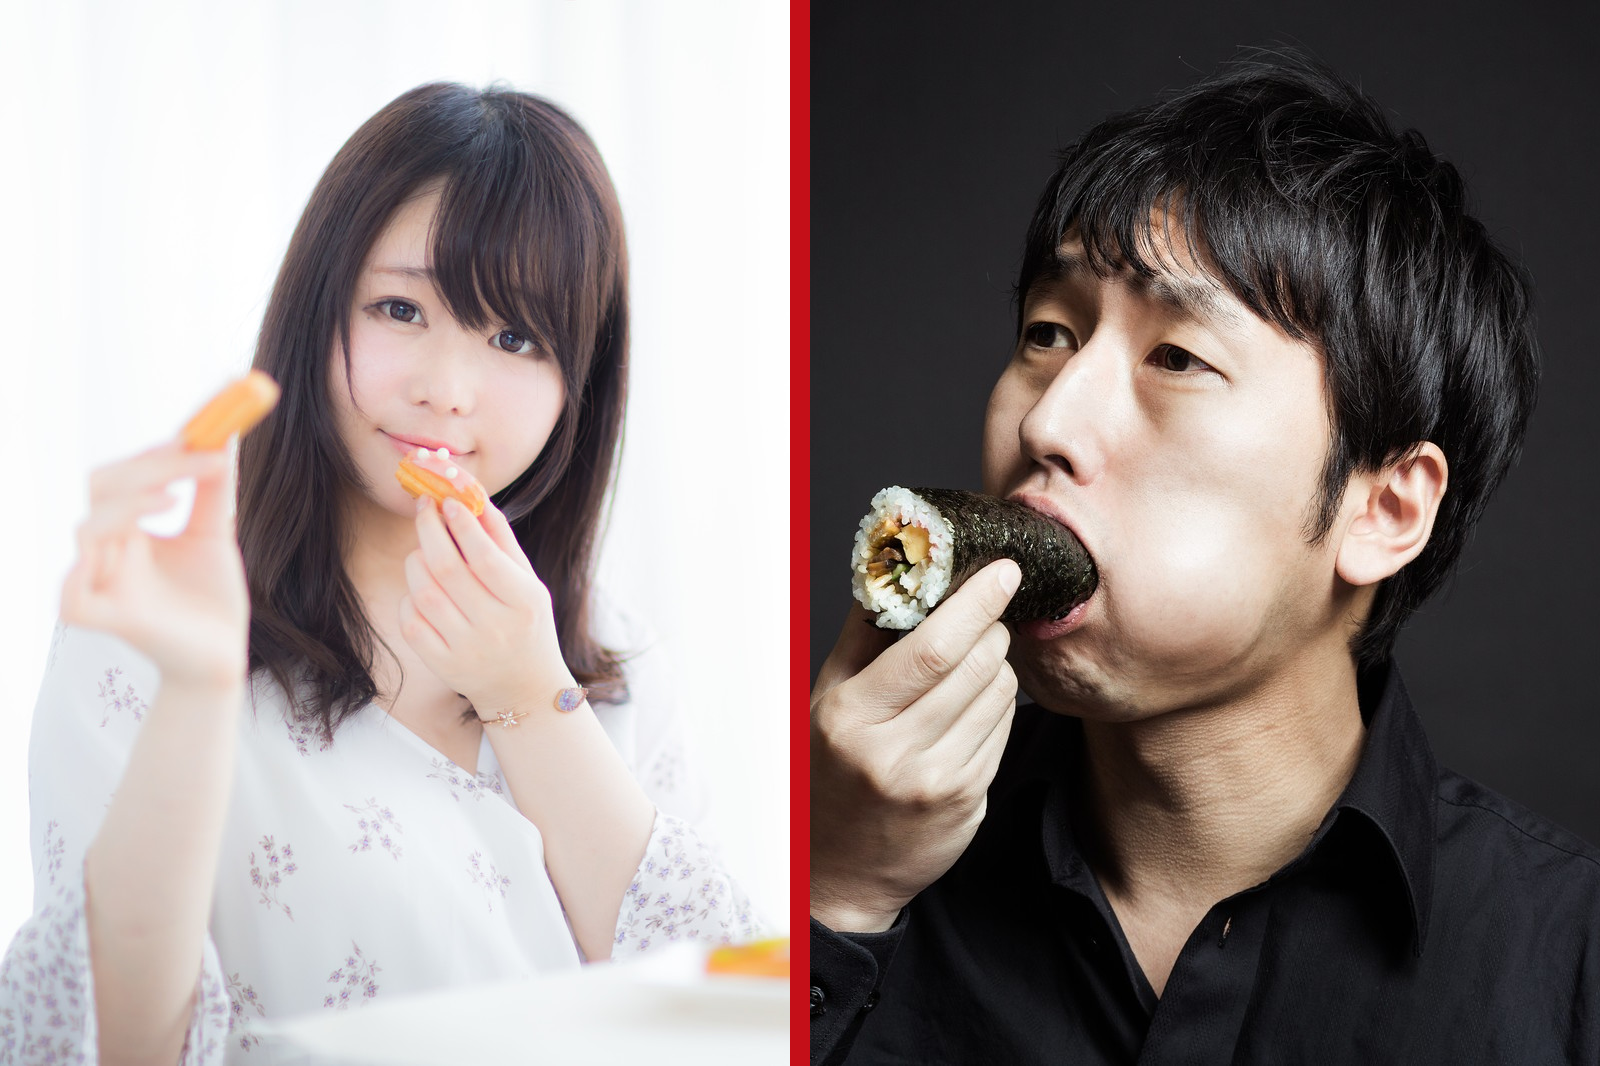 Japanese Sex Survey - Survey says Japan is deeply dissatisfied in bedroom, prefers eating to  getting it on | SoraNews24 -Japan News-